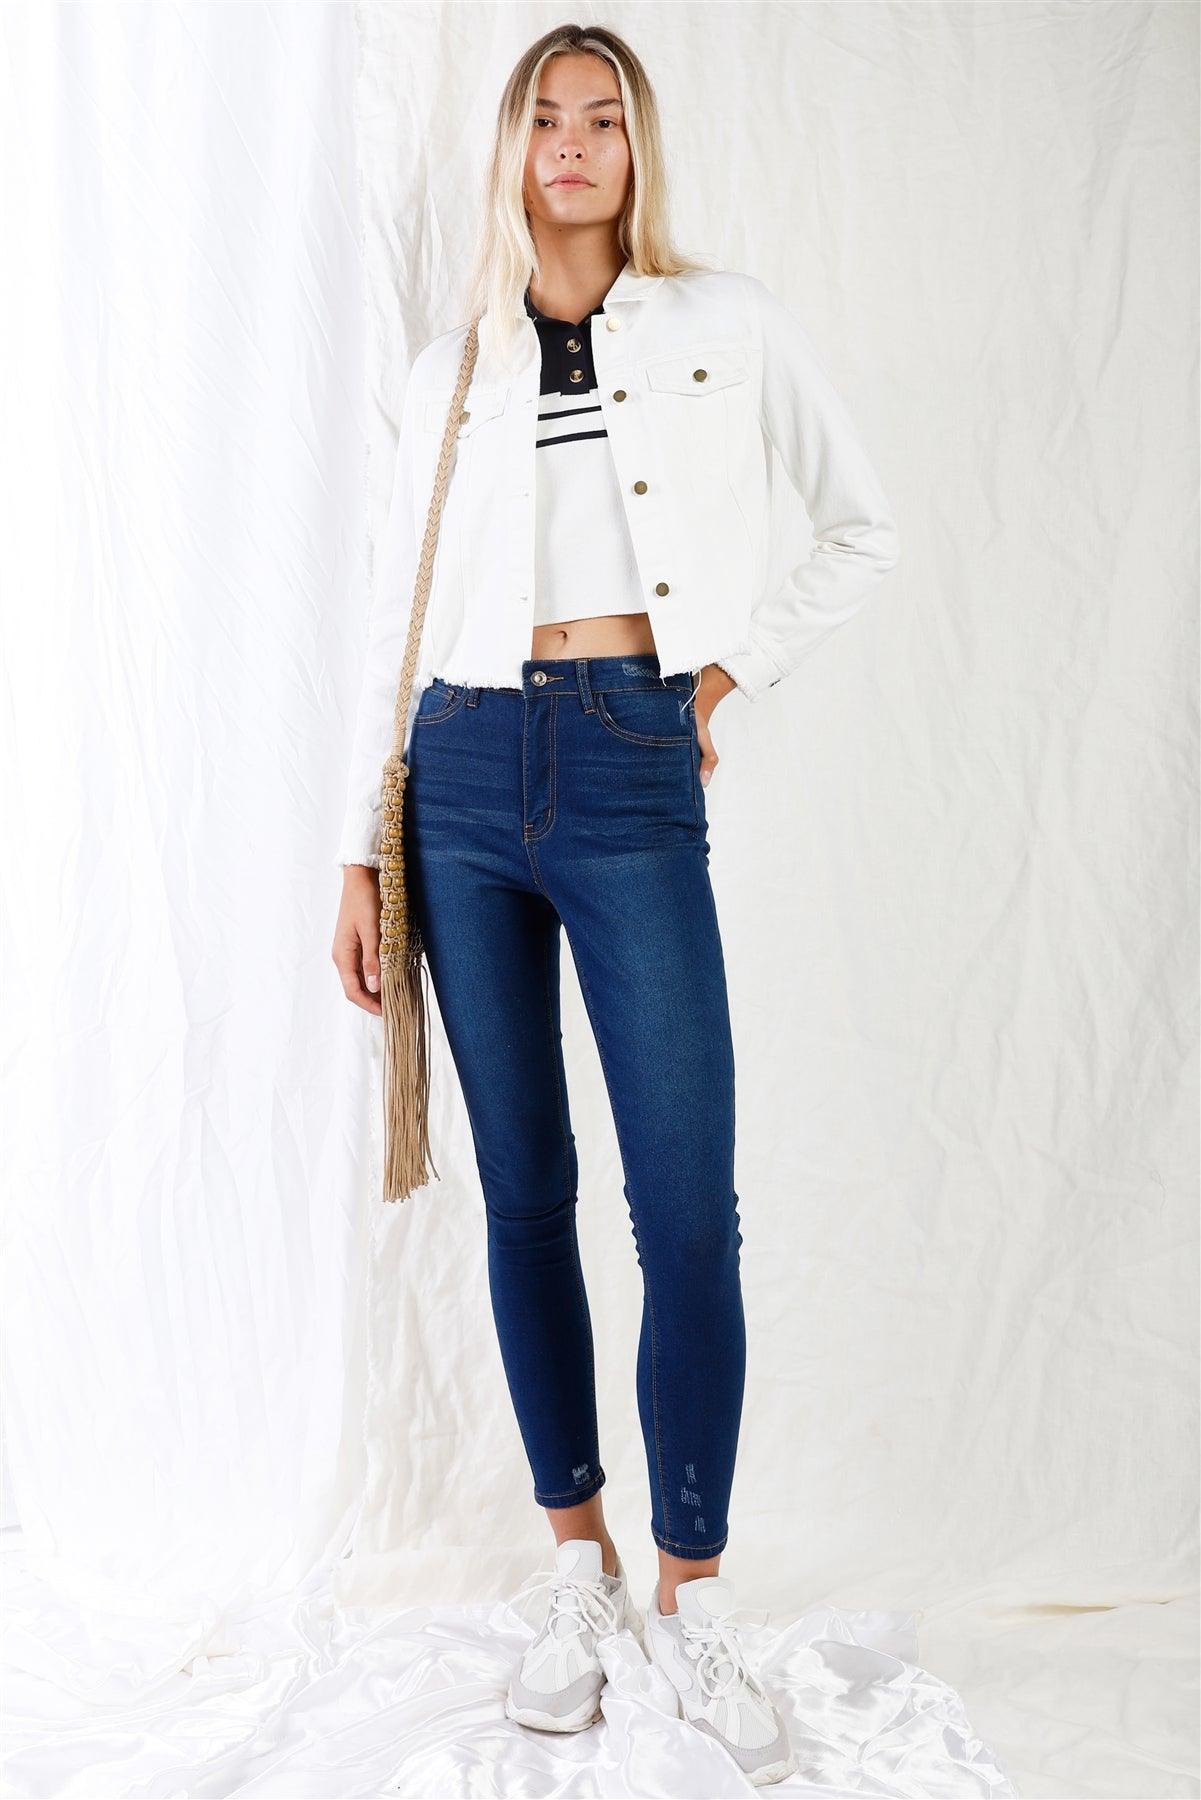 Dark Blue High-Waisted With Rips Skinny Denim Jeans /1-1-3-3-2-1-1